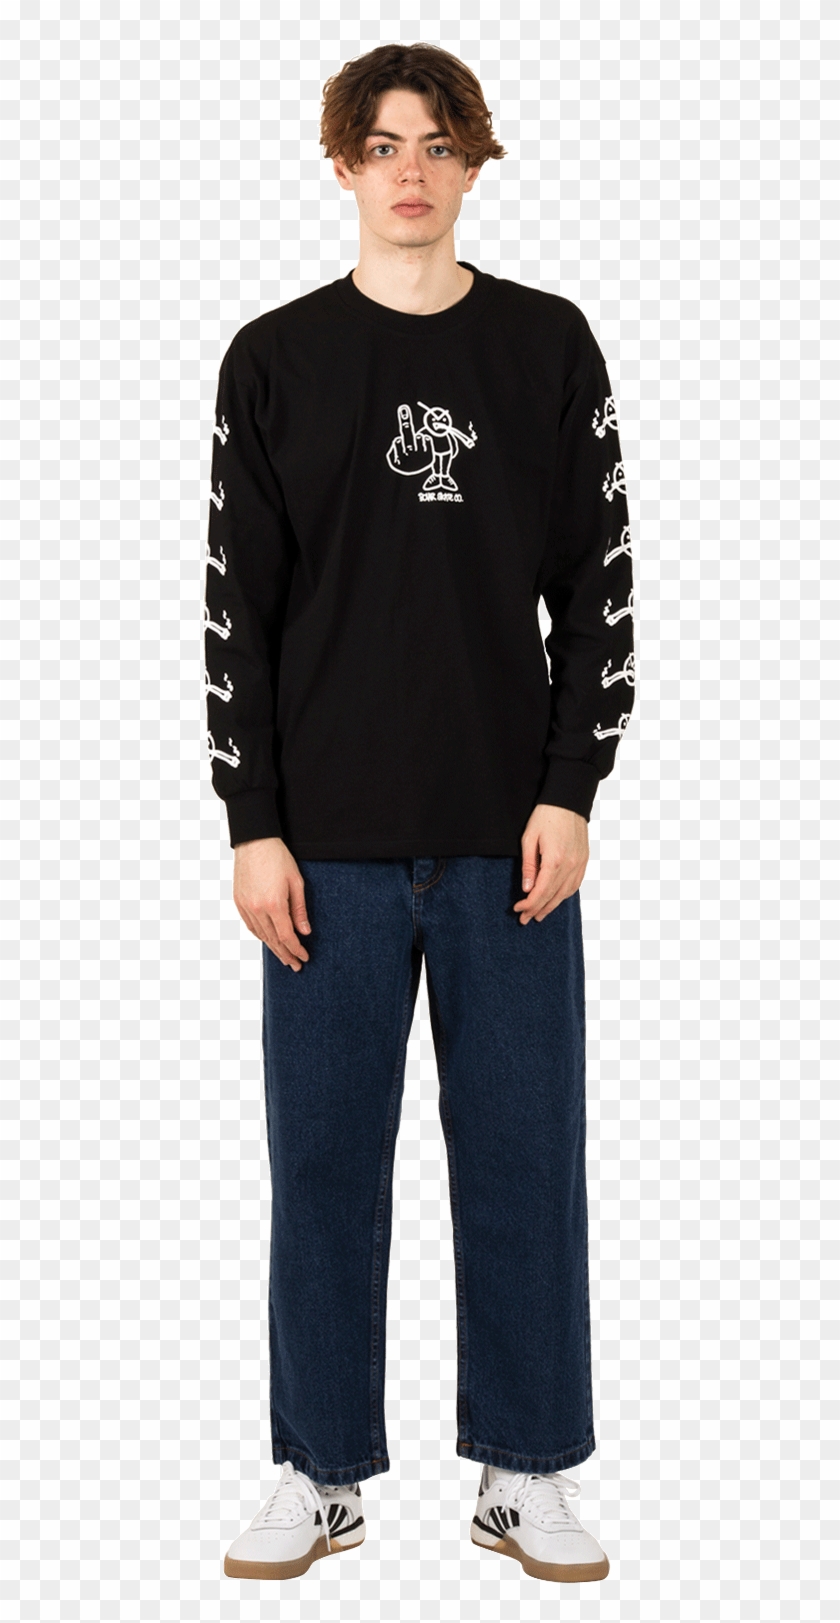 Angry Stoner Longsleeve Pol-angry Ls Blk - Boy Clipart #2426793